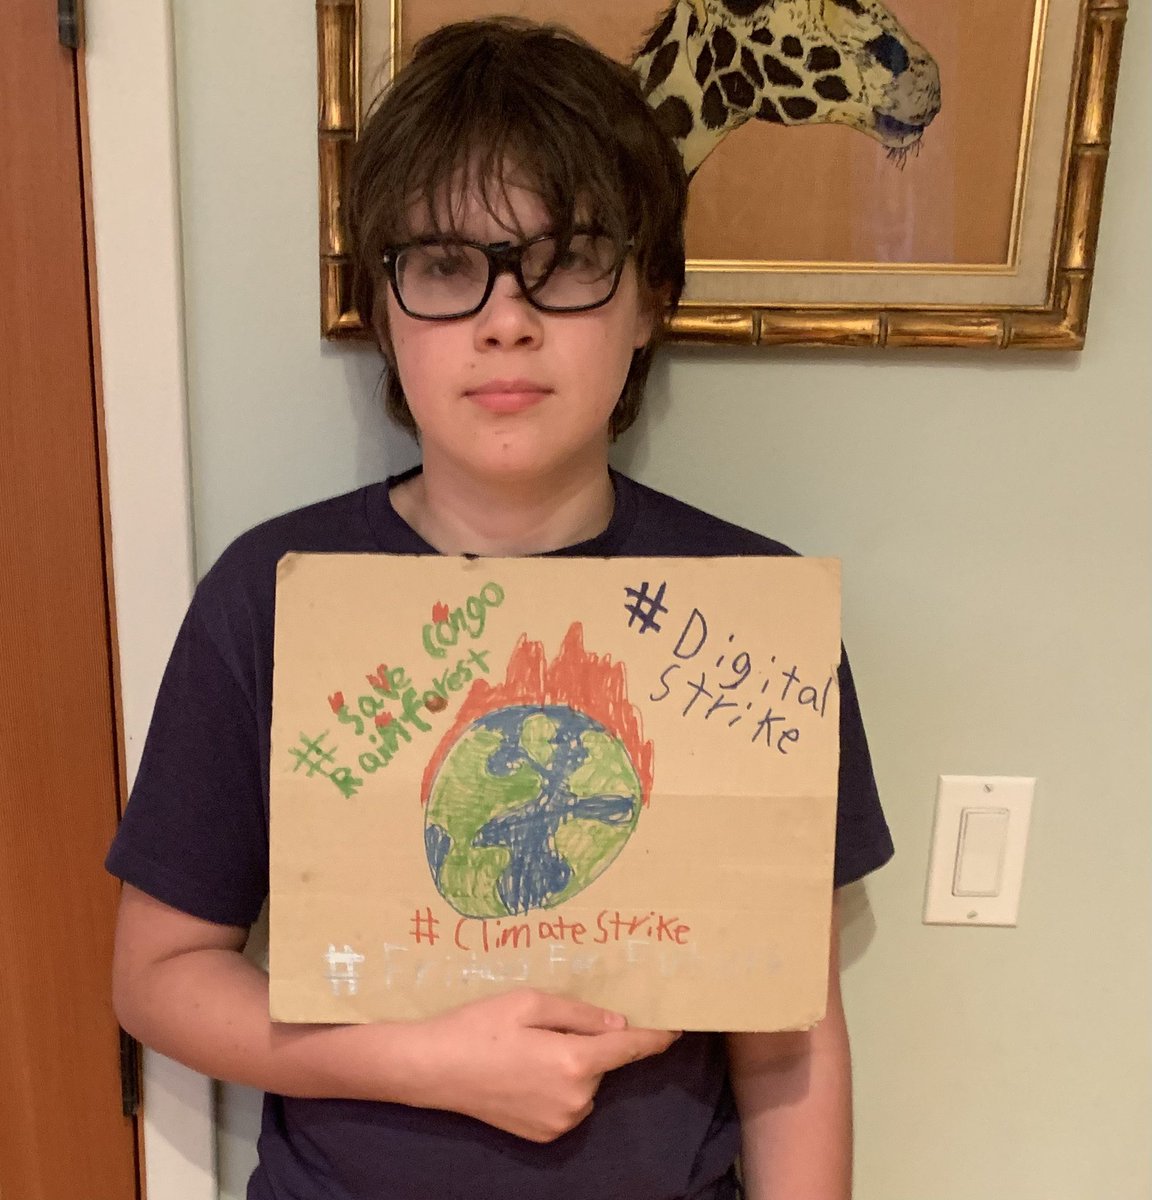 Week 102 We young people are calling for urgently climate action now! It is time for people in power to listen! #ClimateCrisis #ClimateEmergency #ClimateActionNow #FightFor1Point5 #savecongorainforest #fffportlandmetro #ClimateStrike #FridaysForFuture #ClimateAction